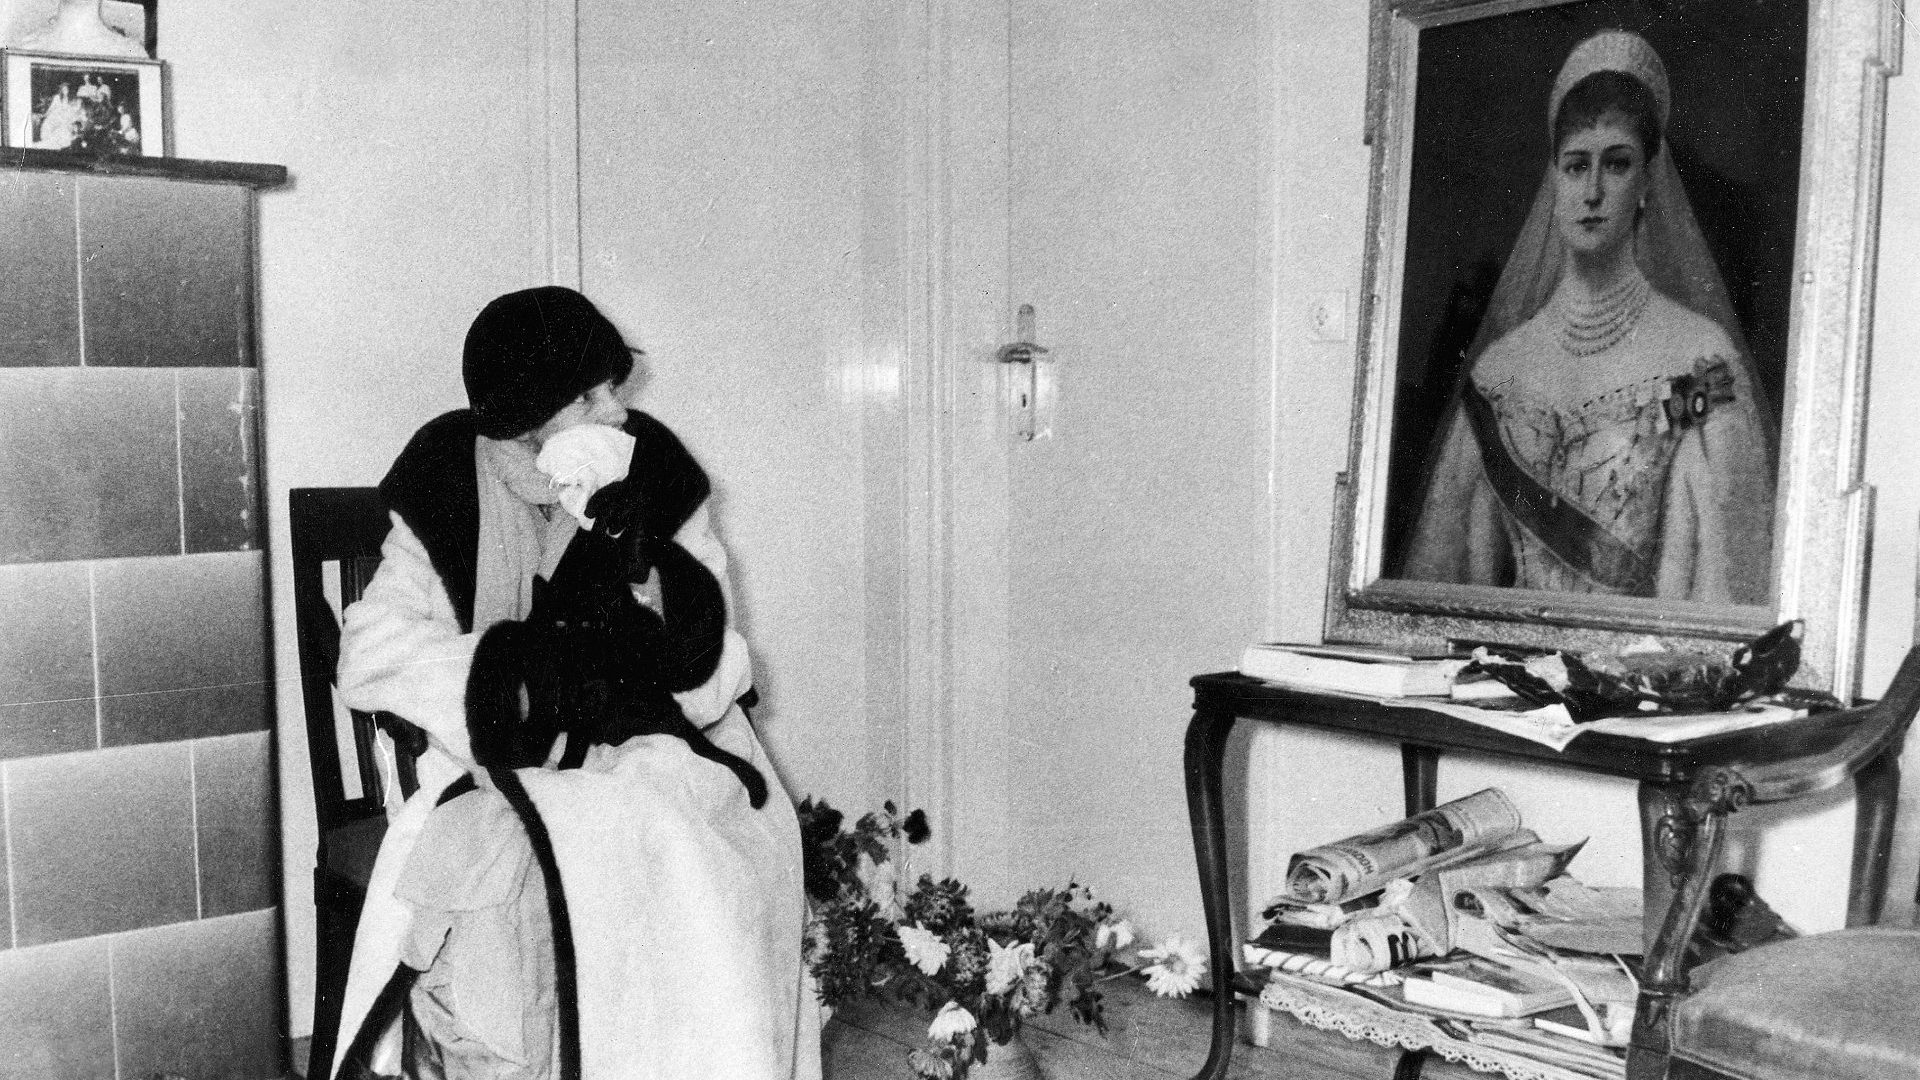 Romanov impostor Anna Anderson (born Franziska Schanzkowska) in front of a portrait of the Grand Duchess Anastasia, whom she claimed to be for more than 60 years, until her death in 1984. Photo: ullstein bild/Getty